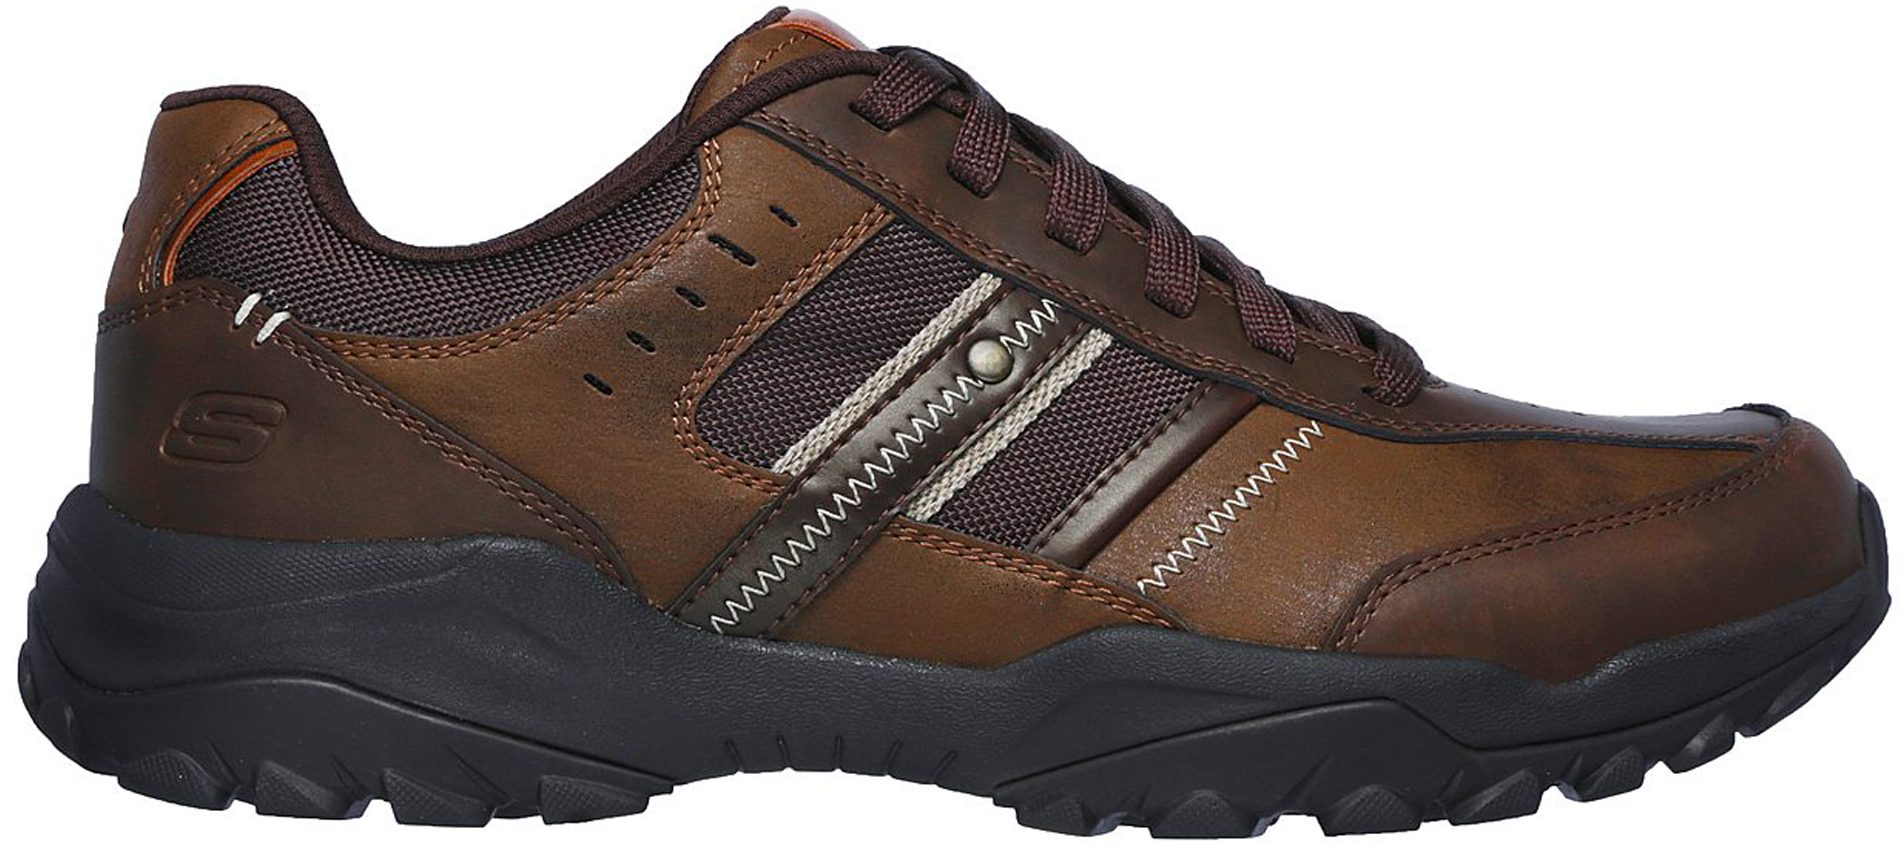 Skechers Relaxed Fit: Henrick - Delwood Brown 66015 CDB - Casual Shoes ...